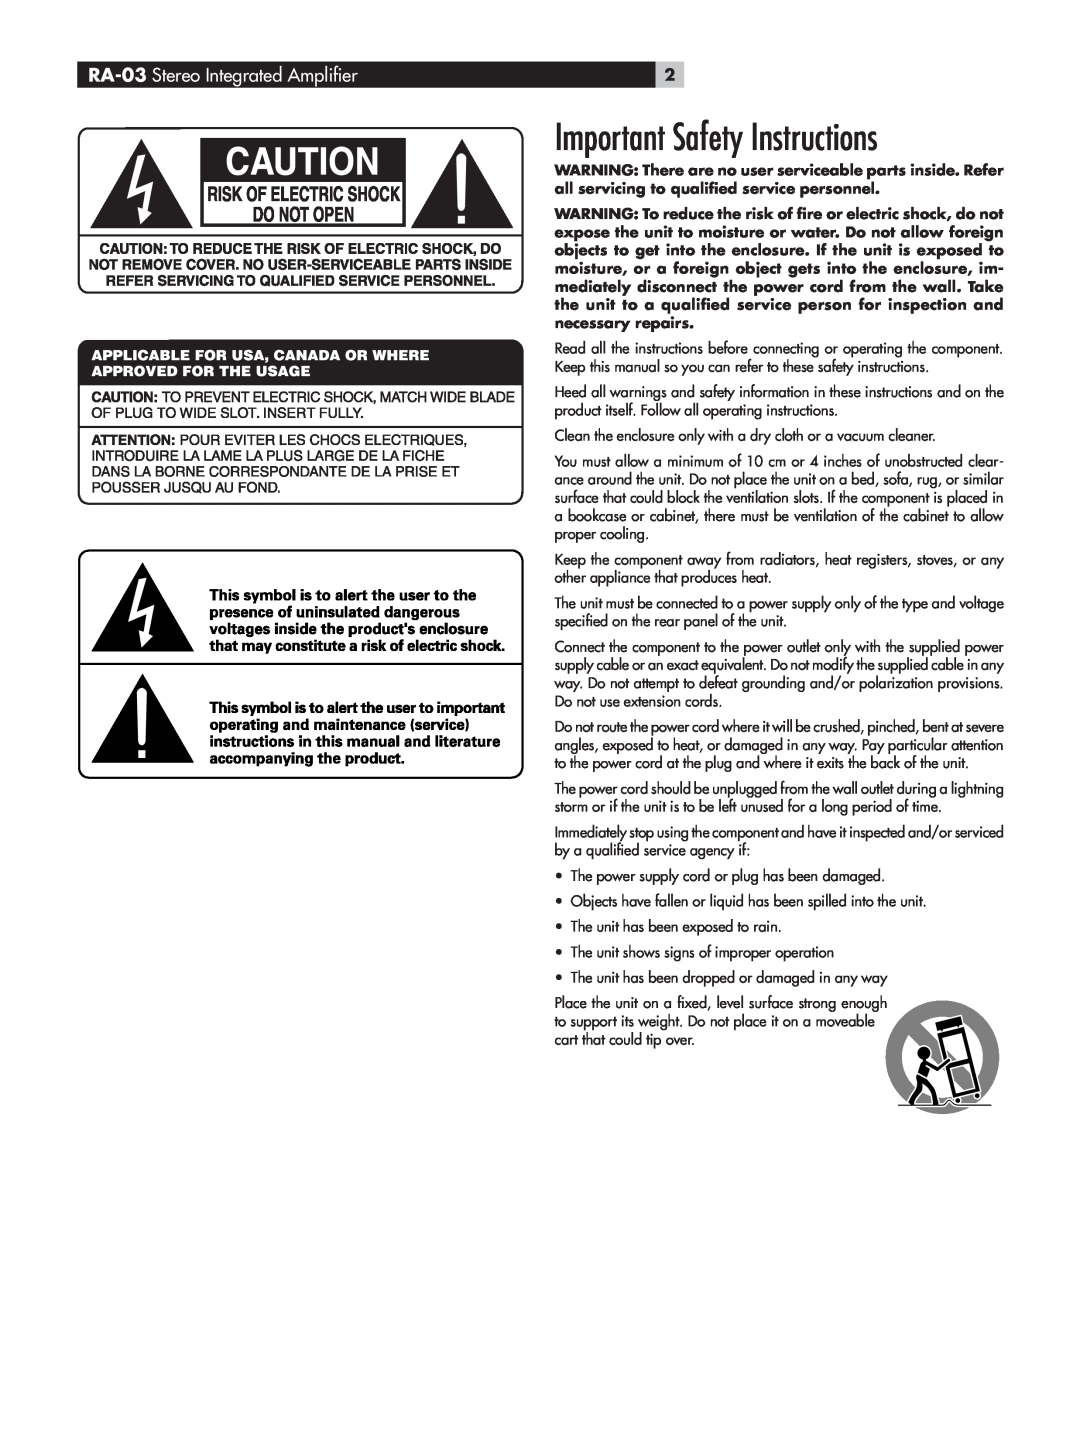 Rotel owner manual Important Safety Instructions, RA-03 Stereo Integrated Ampliﬁer 